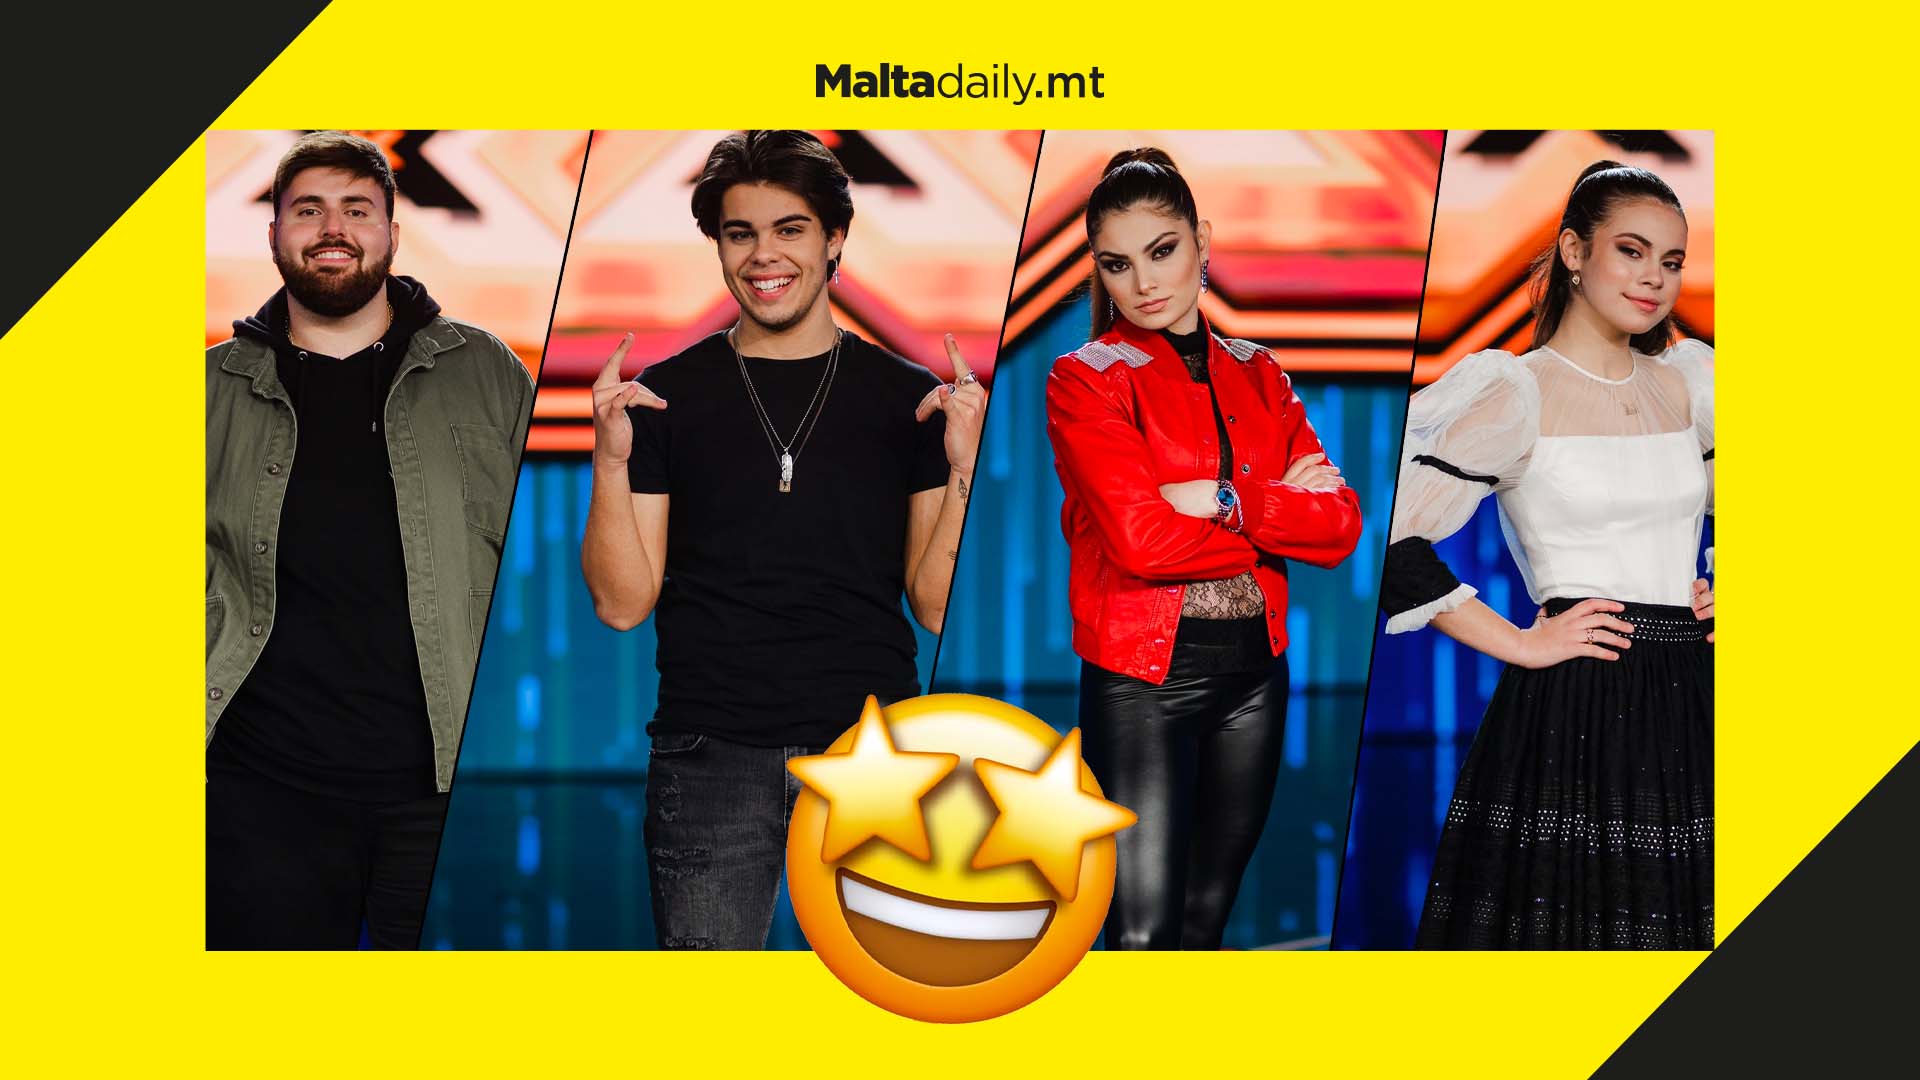 These are your X-Factor Malta finalists for next Saturday!